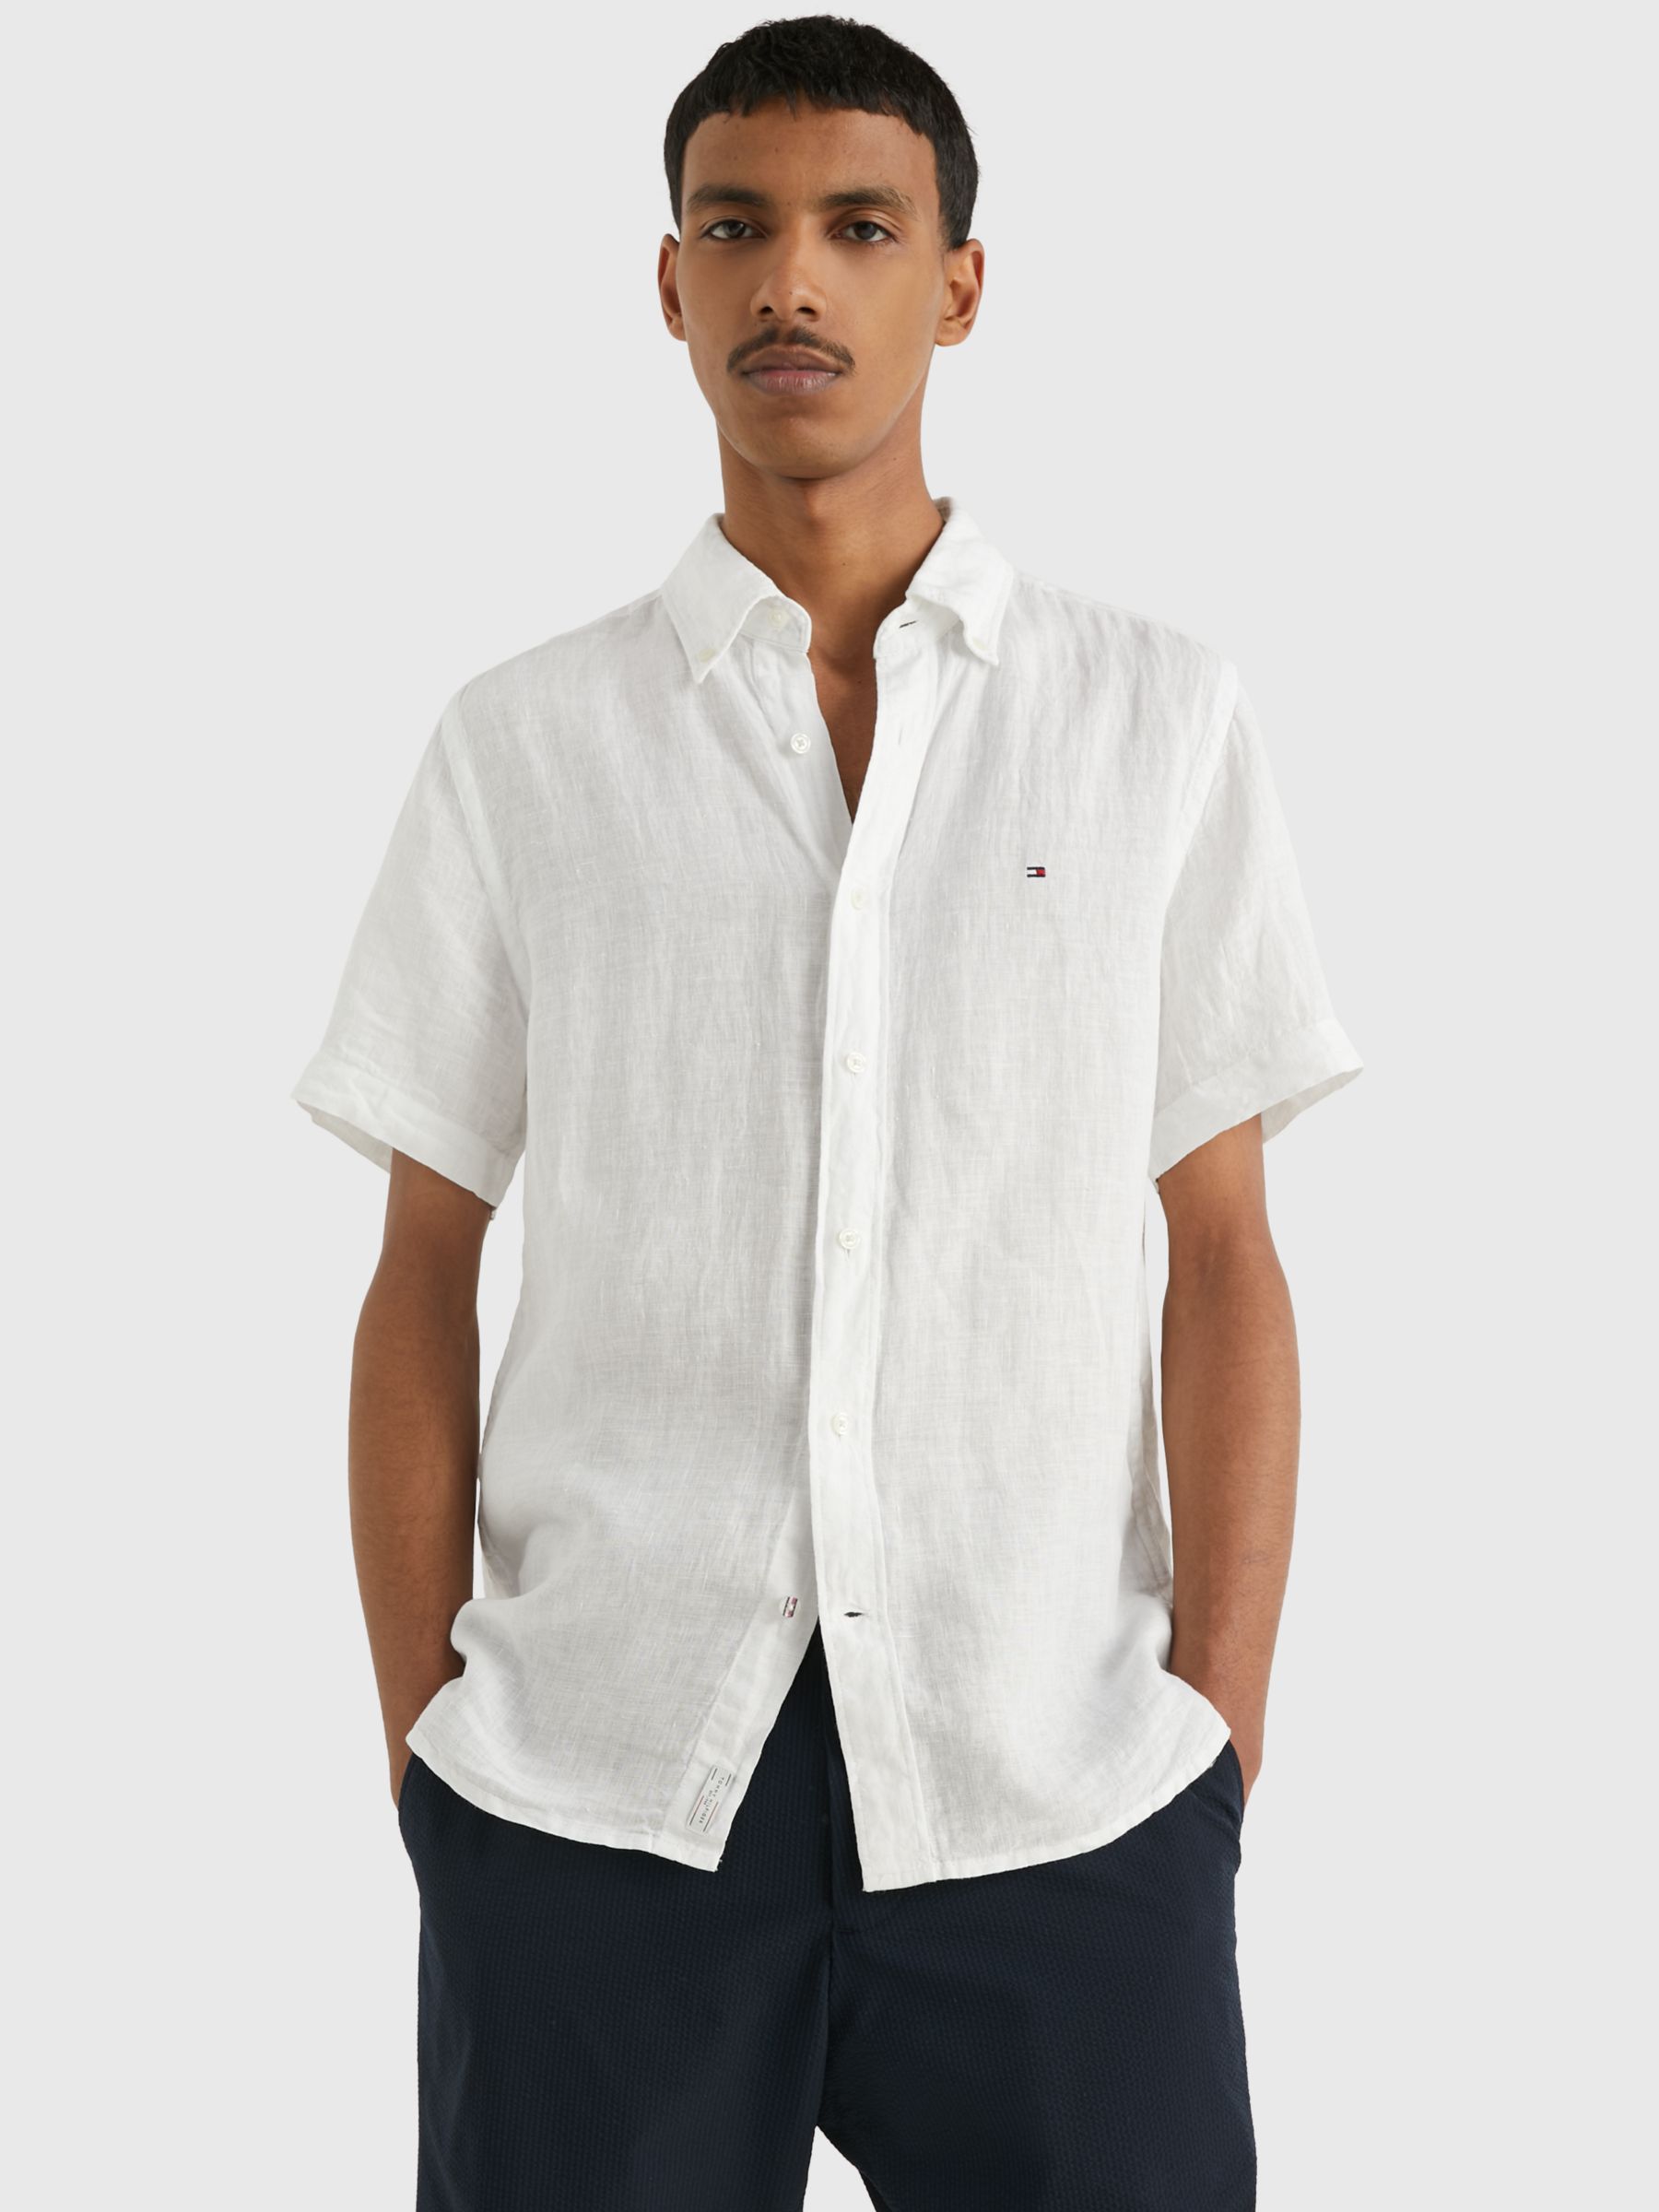 Tommy Hilfiger Pigment Dyed Short Sleeve Shirt, White at John Lewis Partners